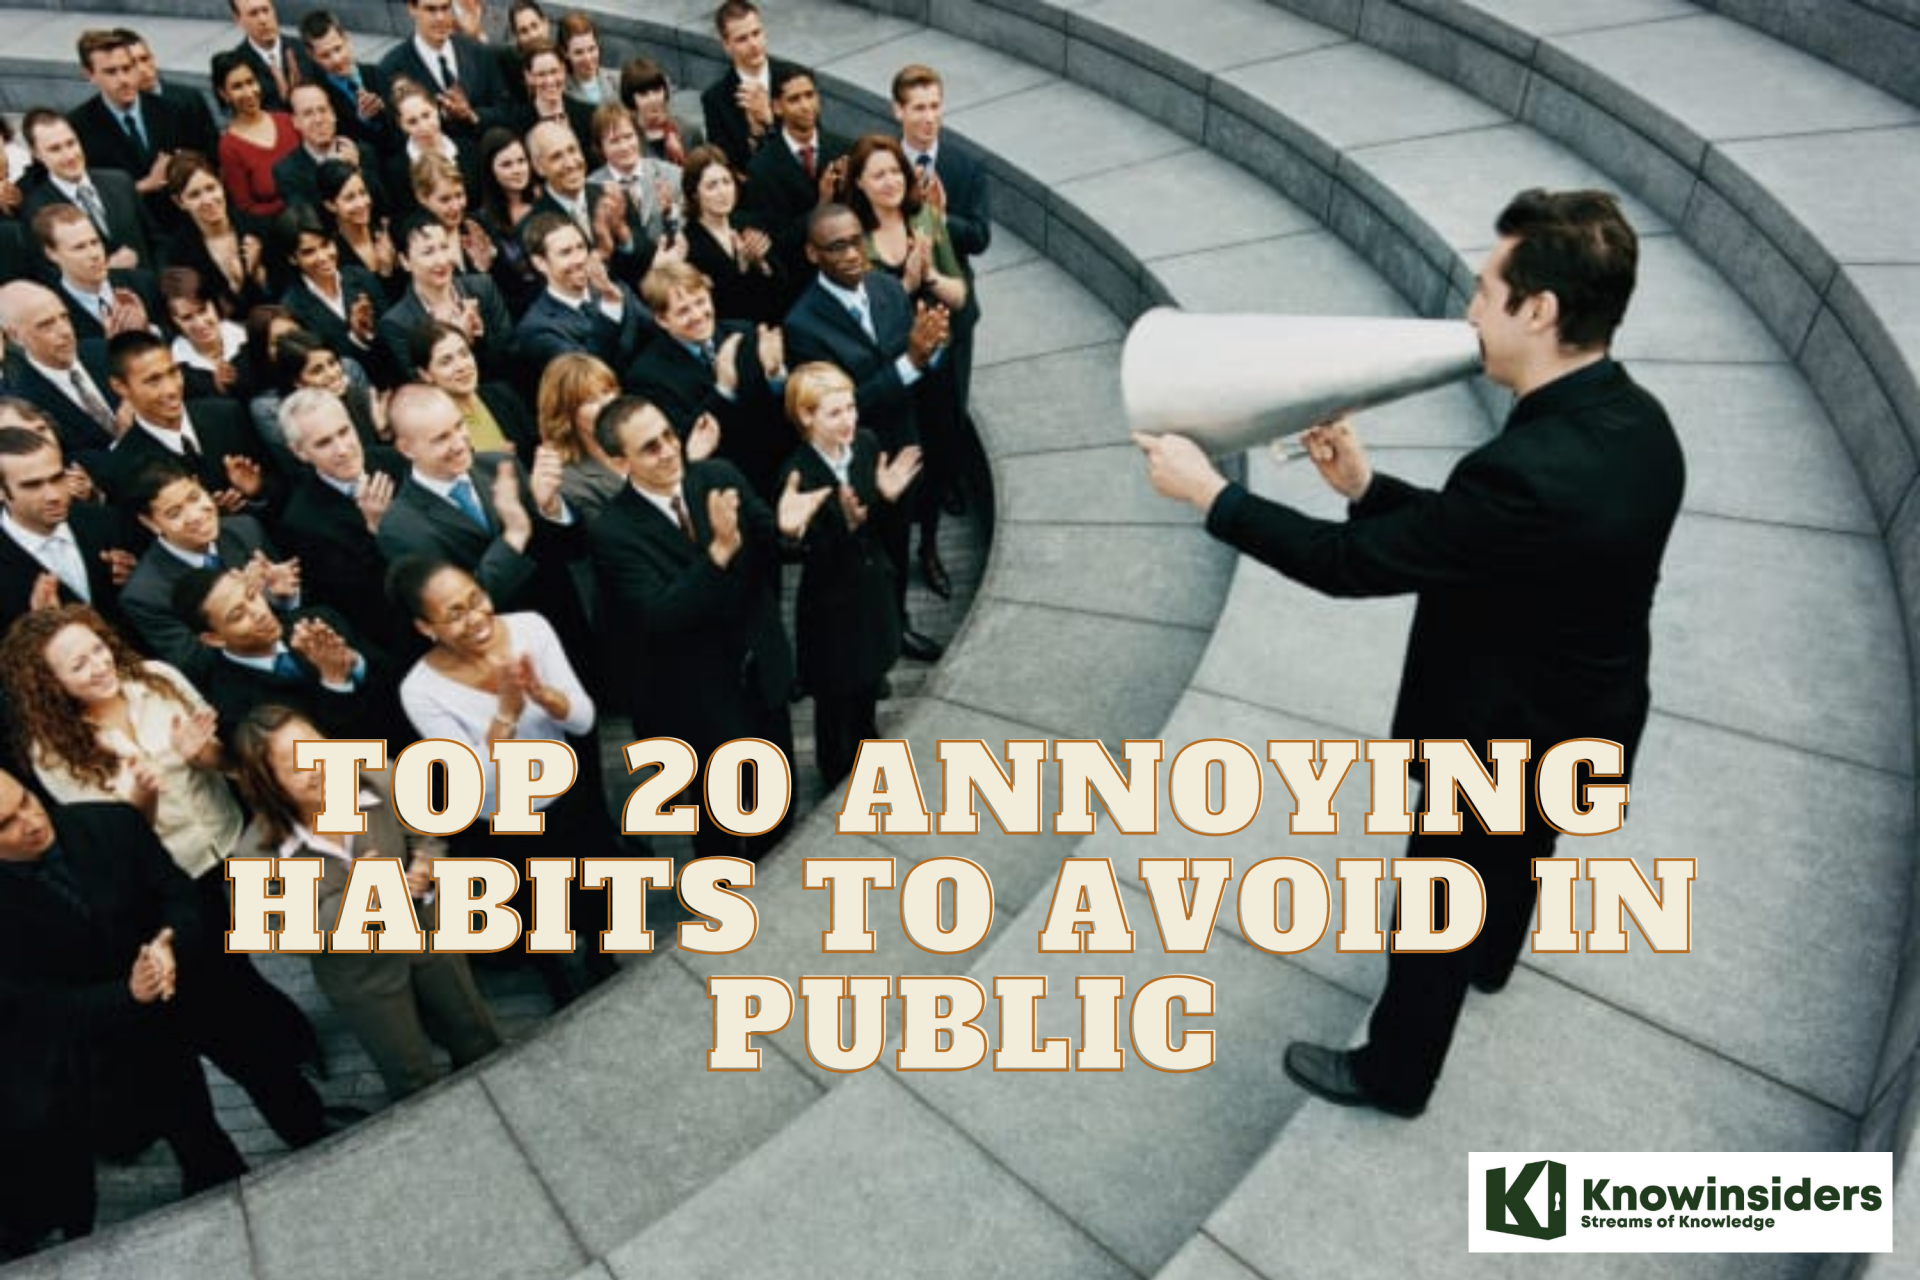 Top 20 Annoying Habits To Avoid In Public